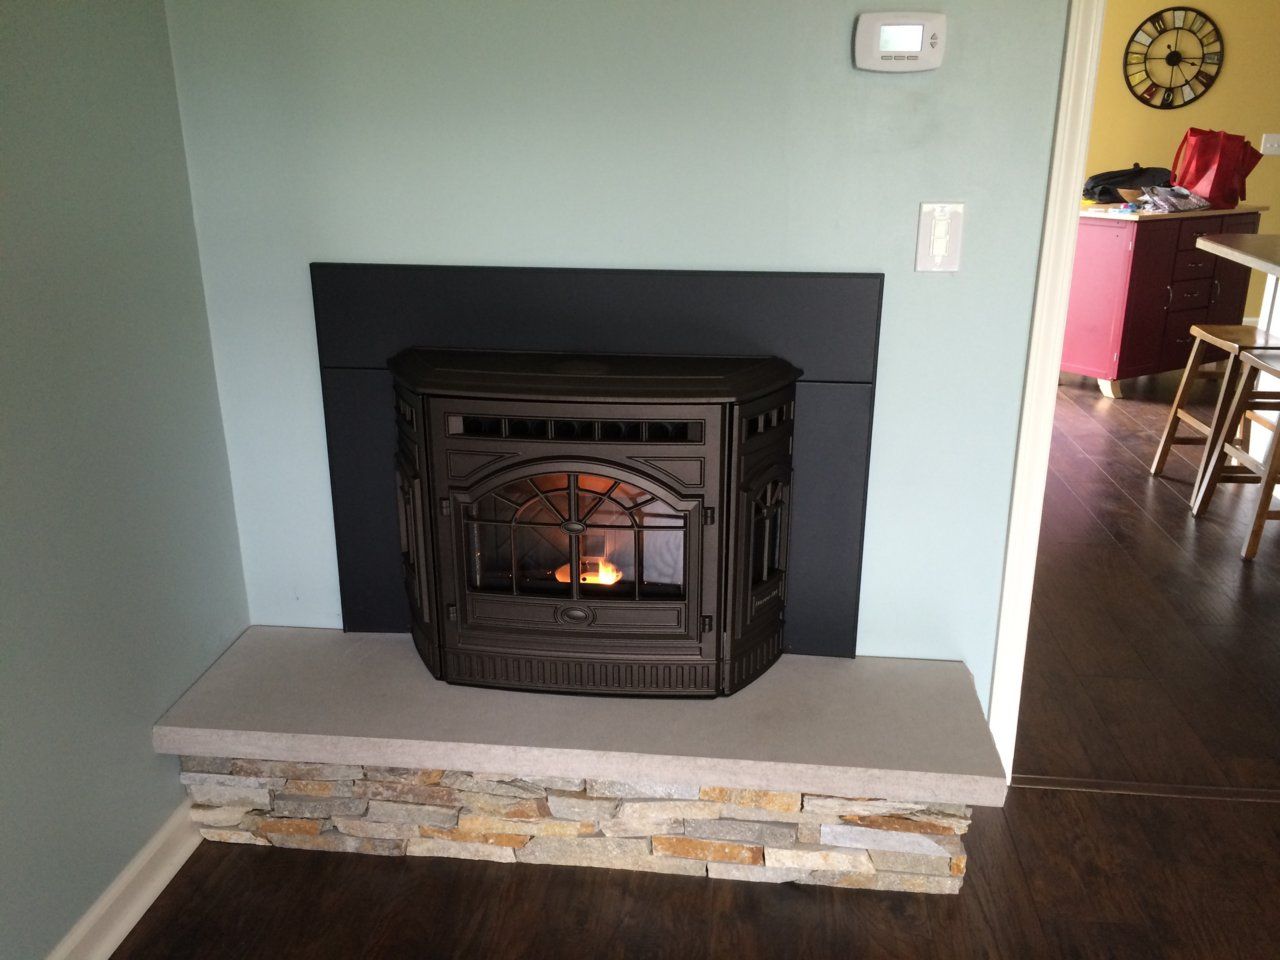 Pellet stove installed and tested